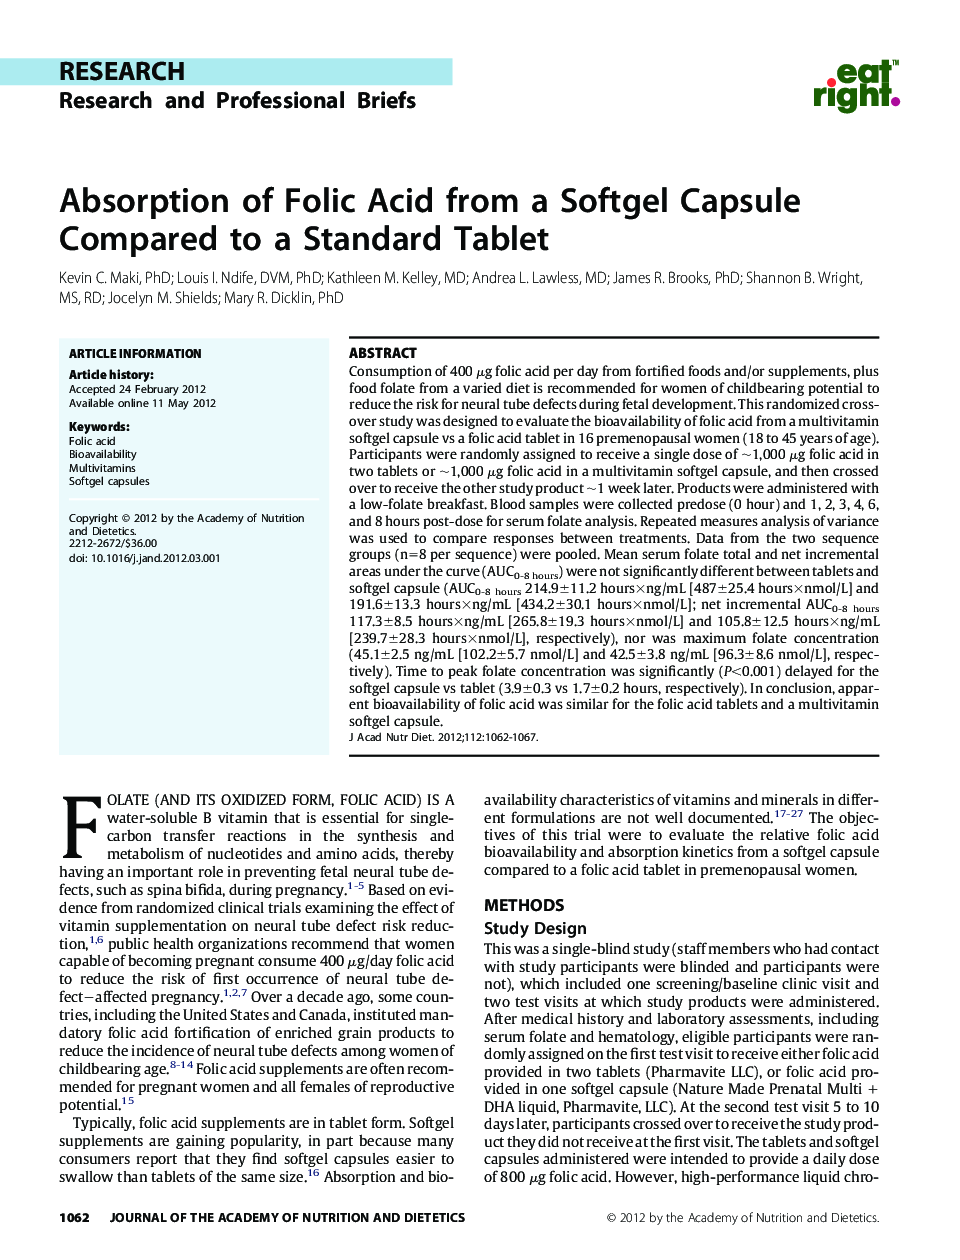 Absorption of Folic Acid from a Softgel Capsule Compared to a Standard Tablet 